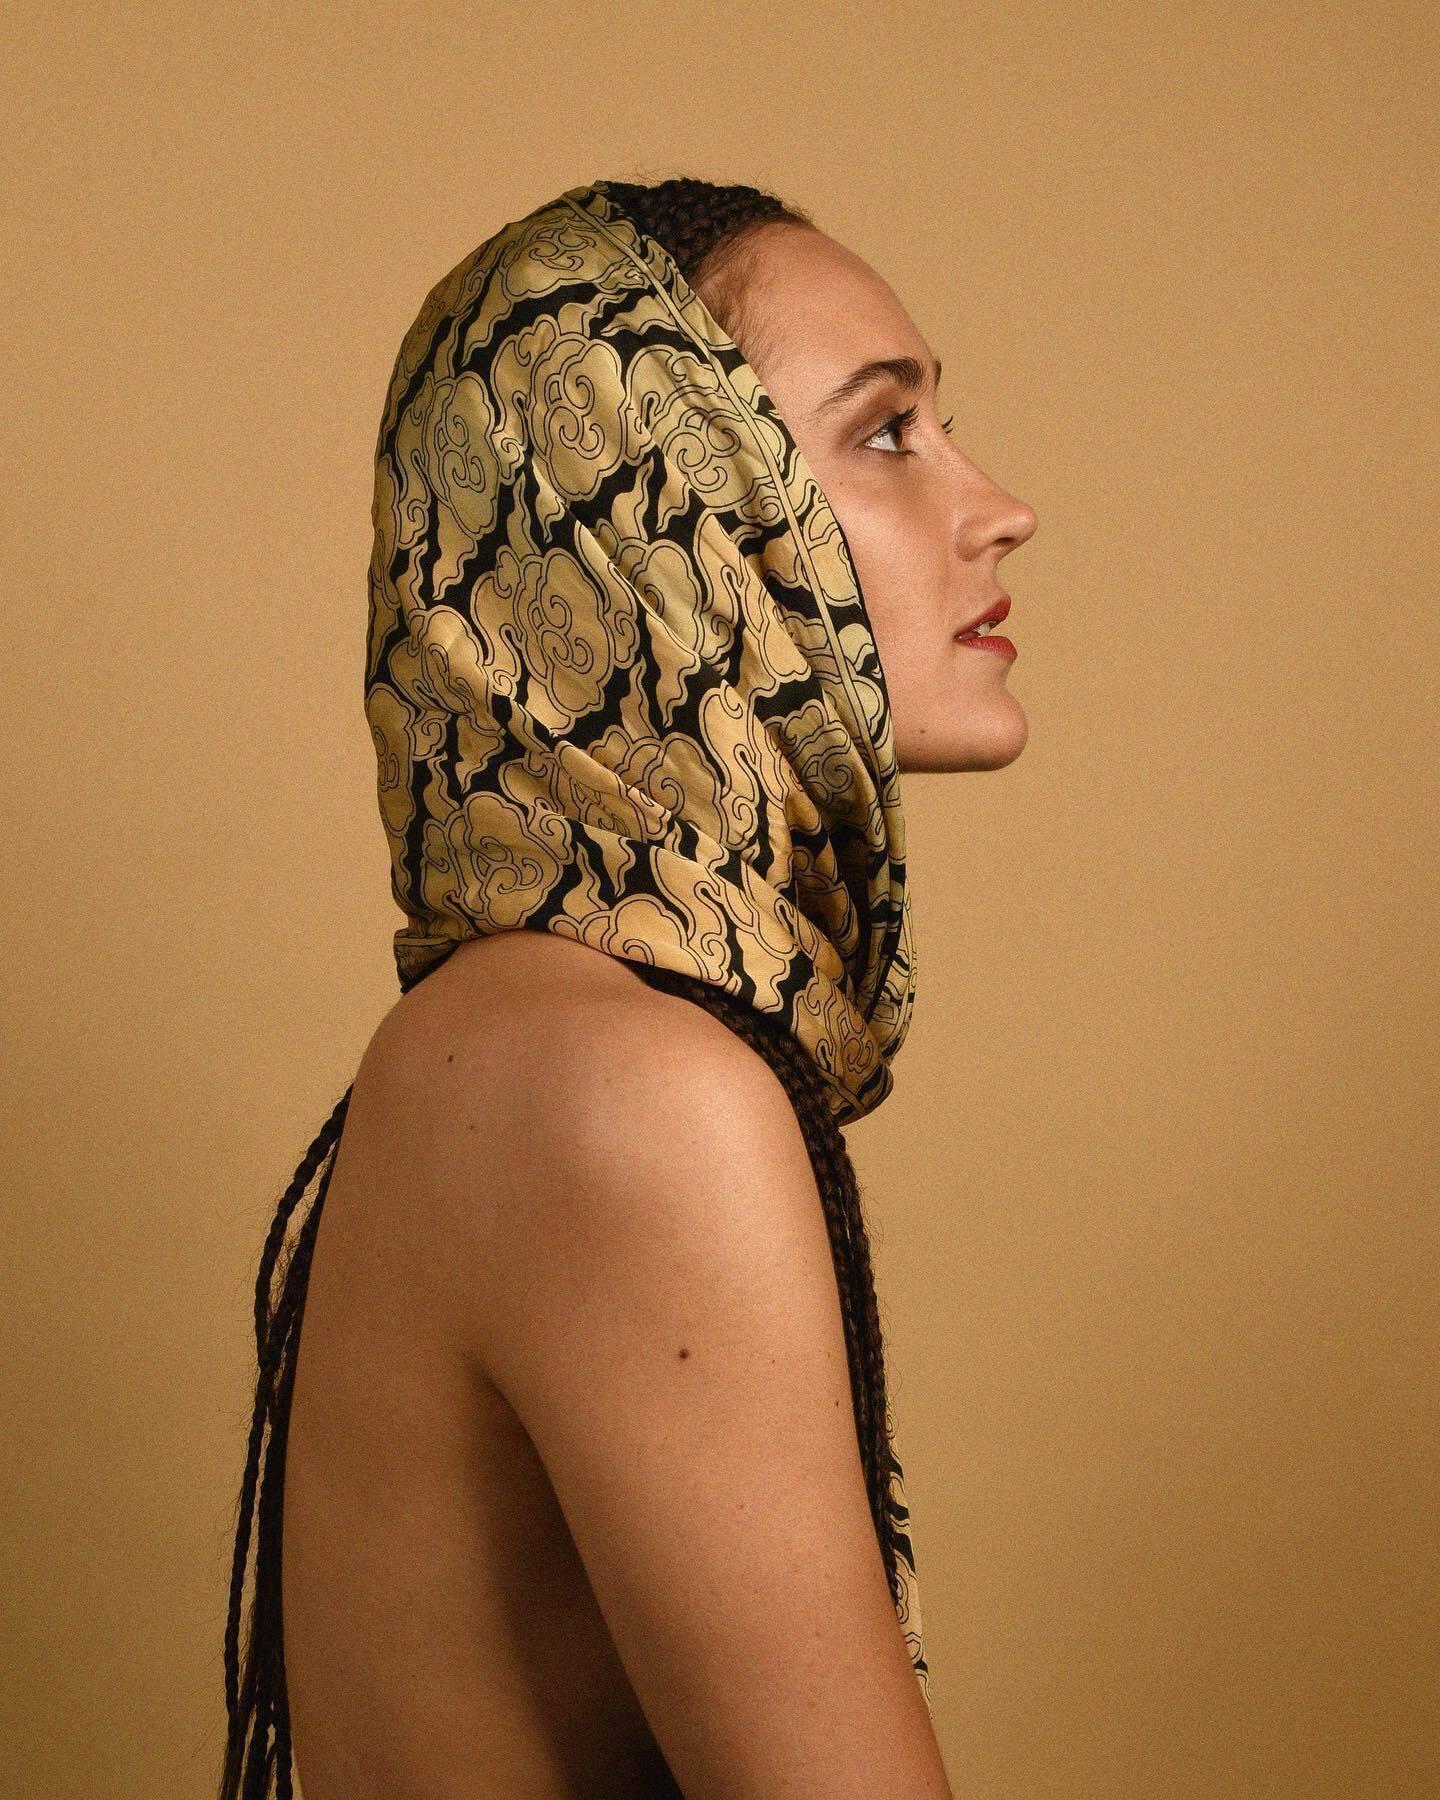 Justine Mauvin, also known as Sibu ManaÏ, featured in a profile pose wearing a gold and black headscarf with light-skinned shoulders showing from the side.